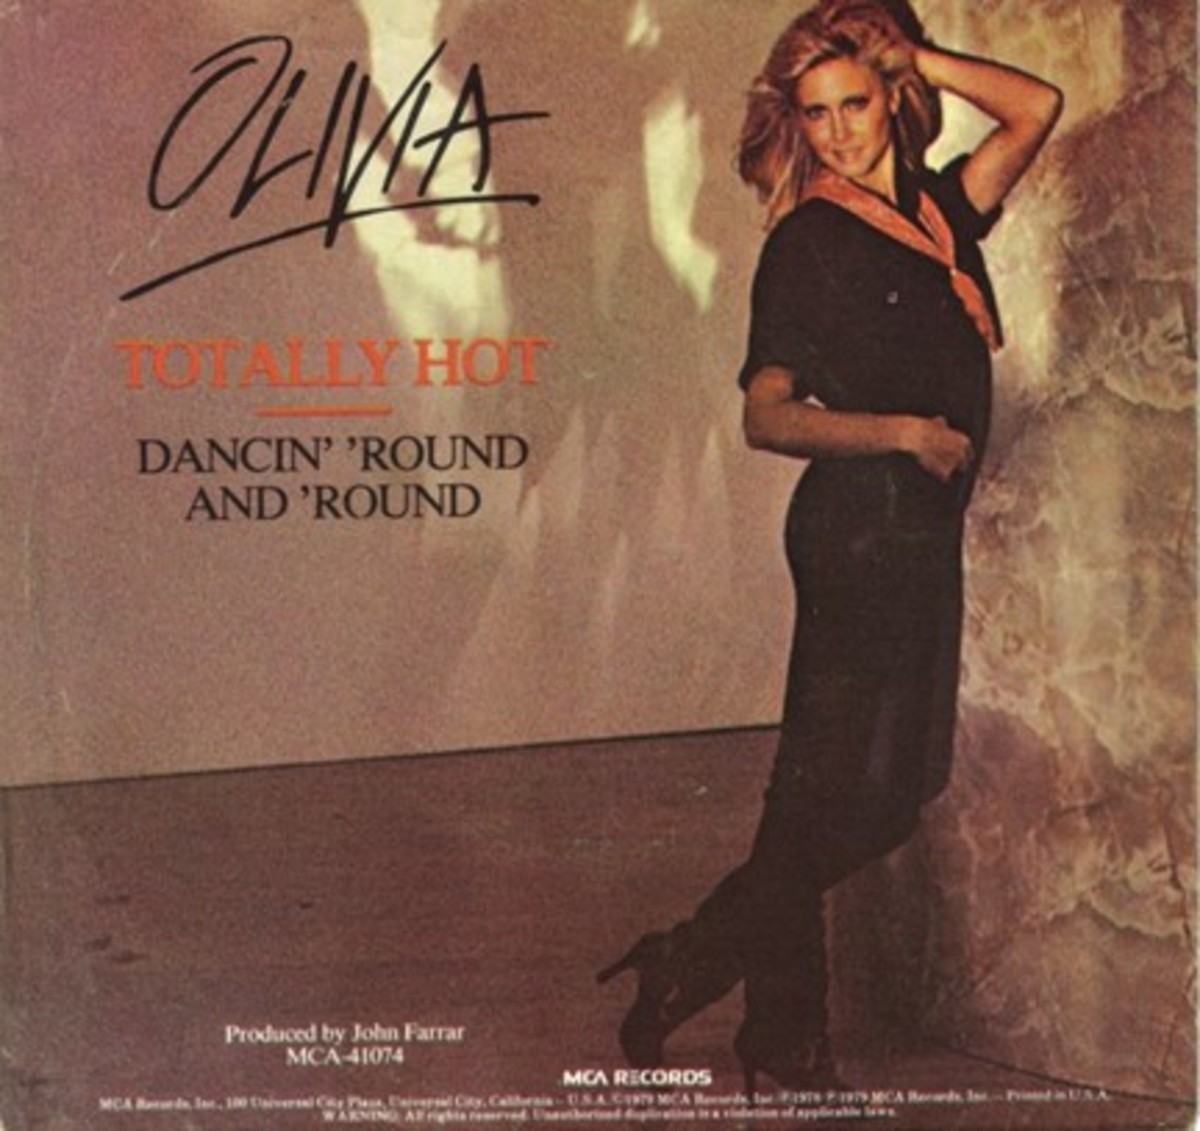 1979 45 picture sleeve